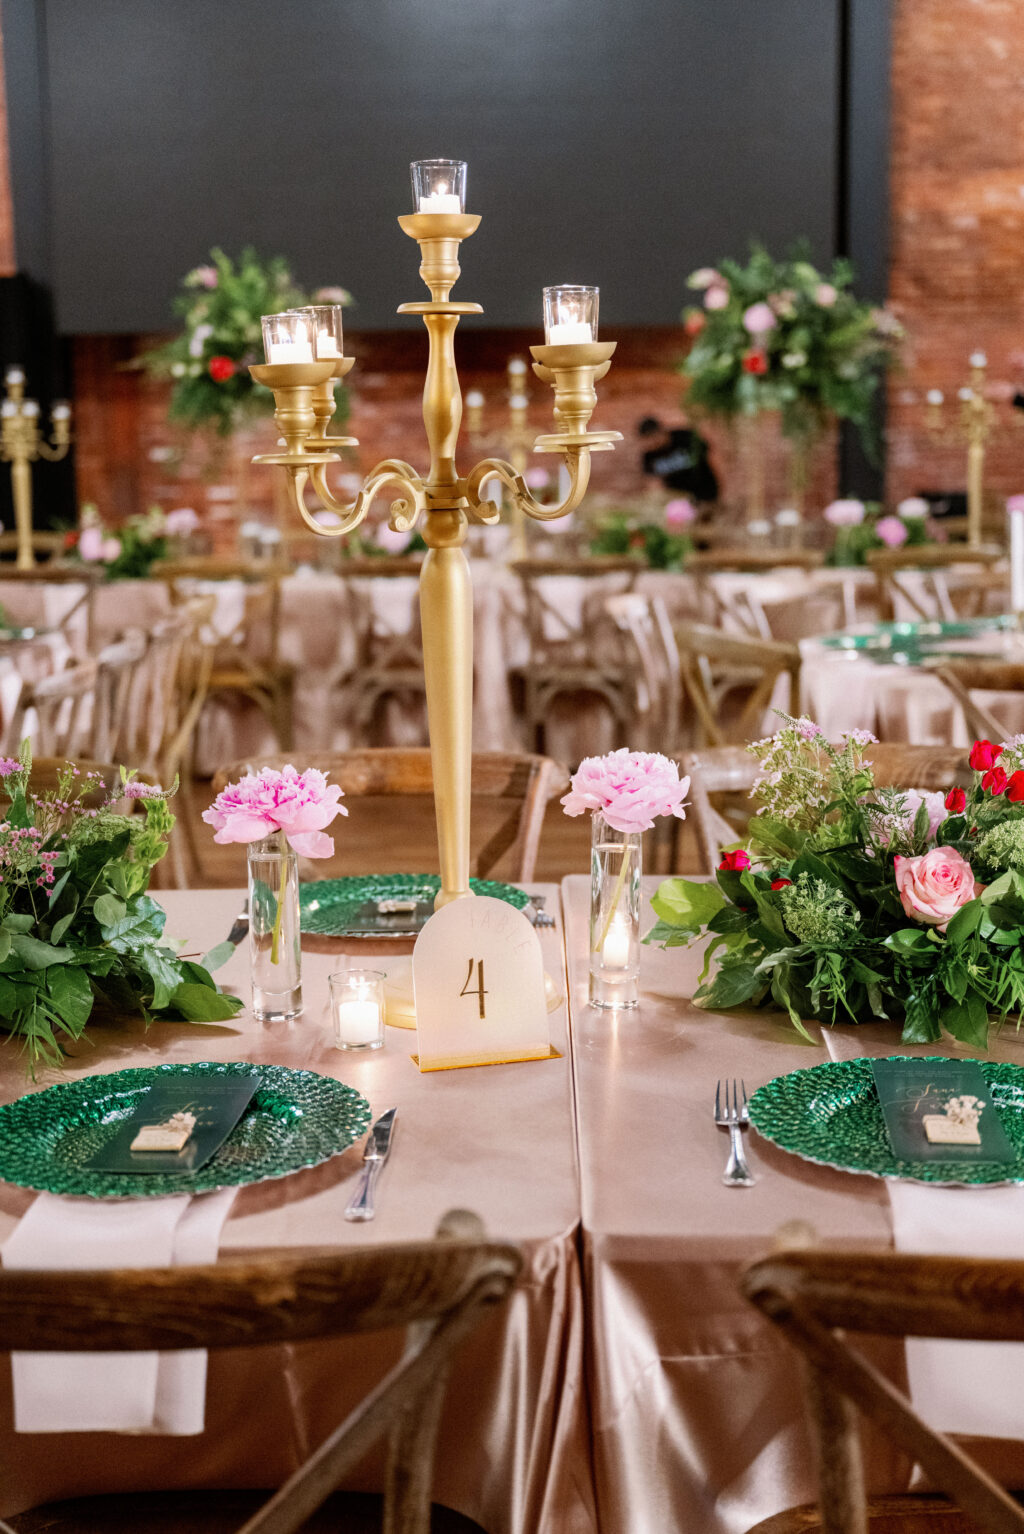 Arched Table Number Ideas | Gold Candelabra | Pink Flower Wedding Reception Centerpieces | Emerald Green Chargers